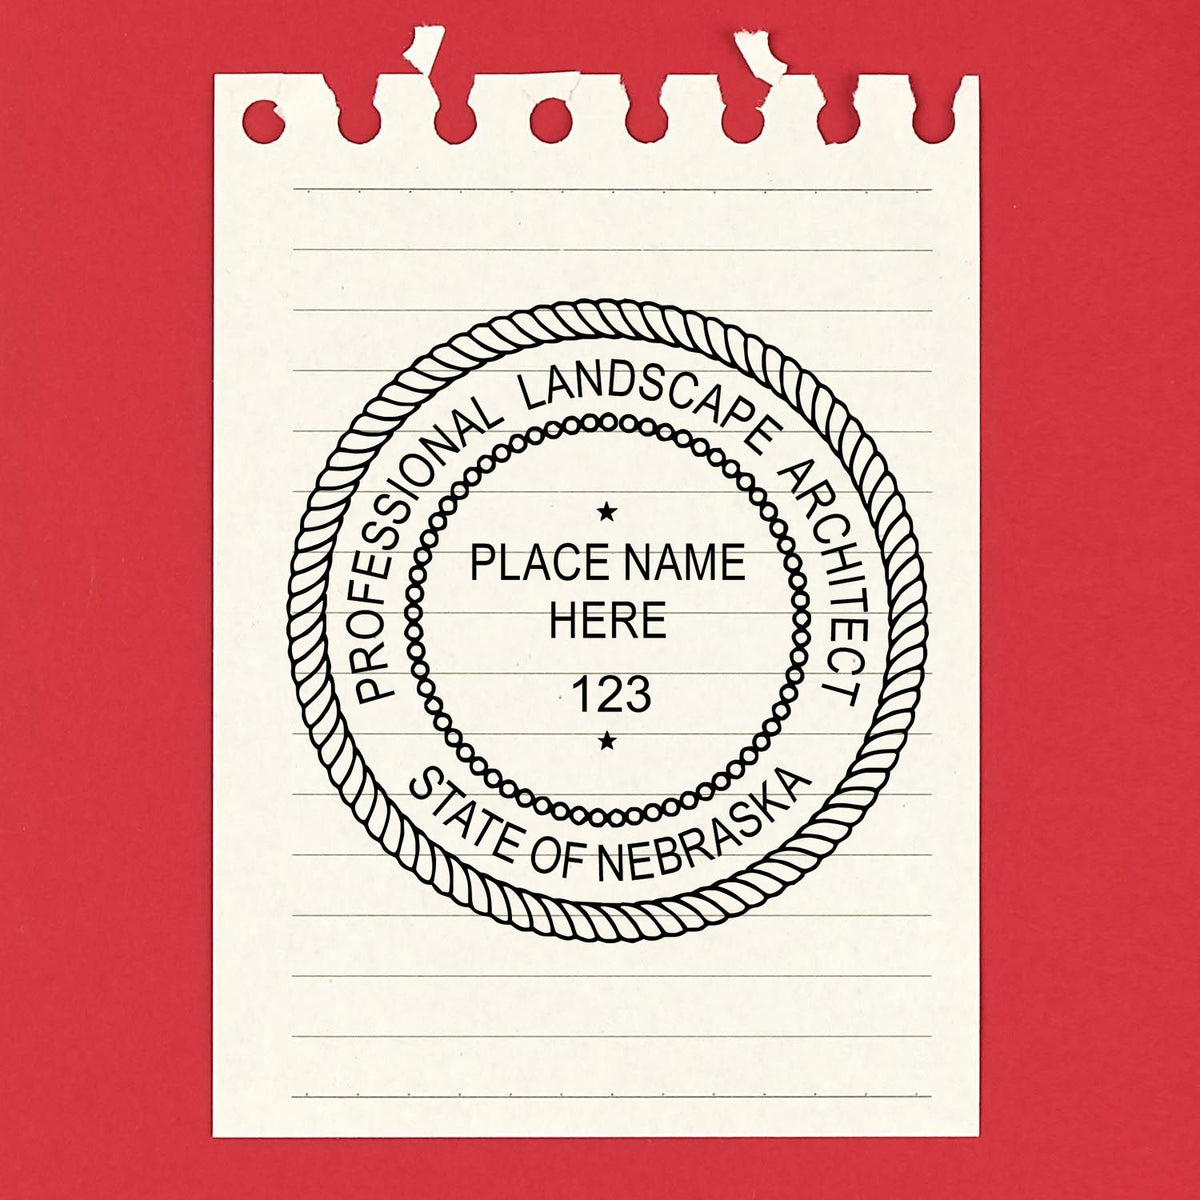 A lifestyle photo showing a stamped image of the Nebraska Landscape Architectural Seal Stamp on a piece of paper